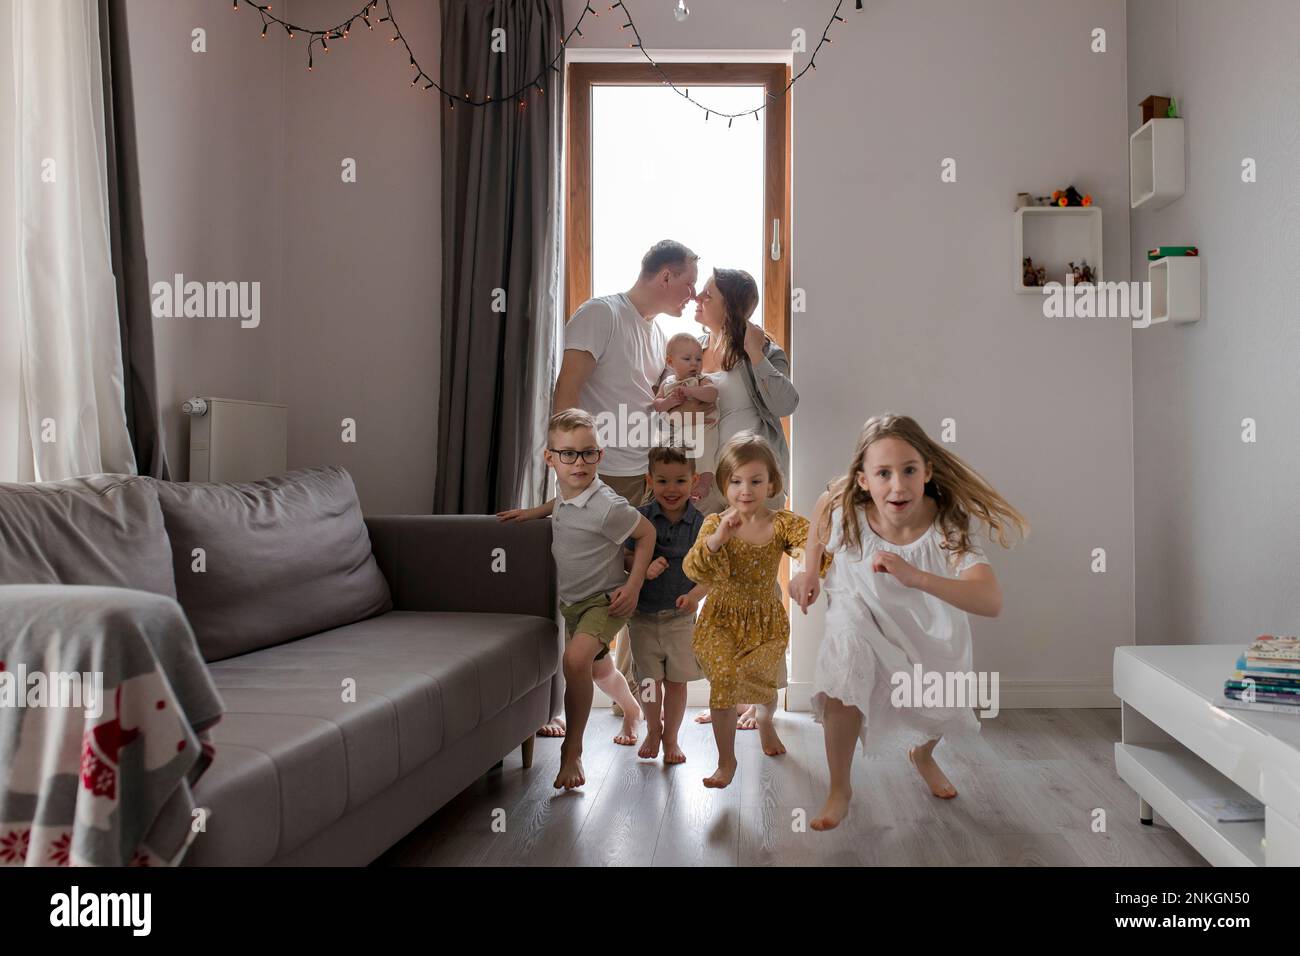 Children running in living room with parents rubbing nose in background Stock Photo